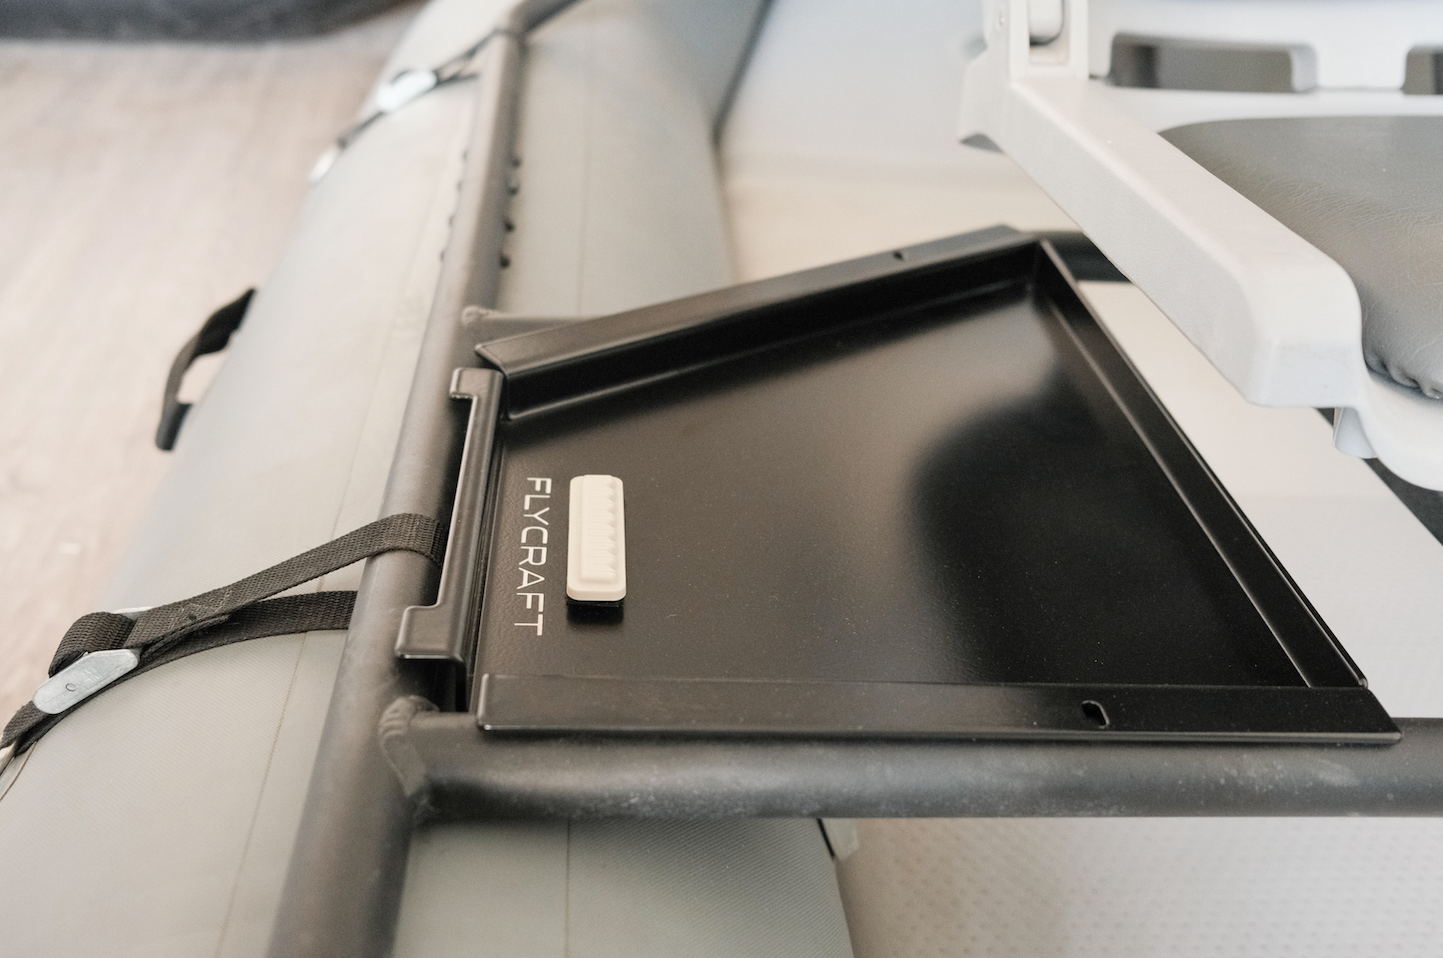 Rower's Gear Trays for Stealth X and Guide Boat Models